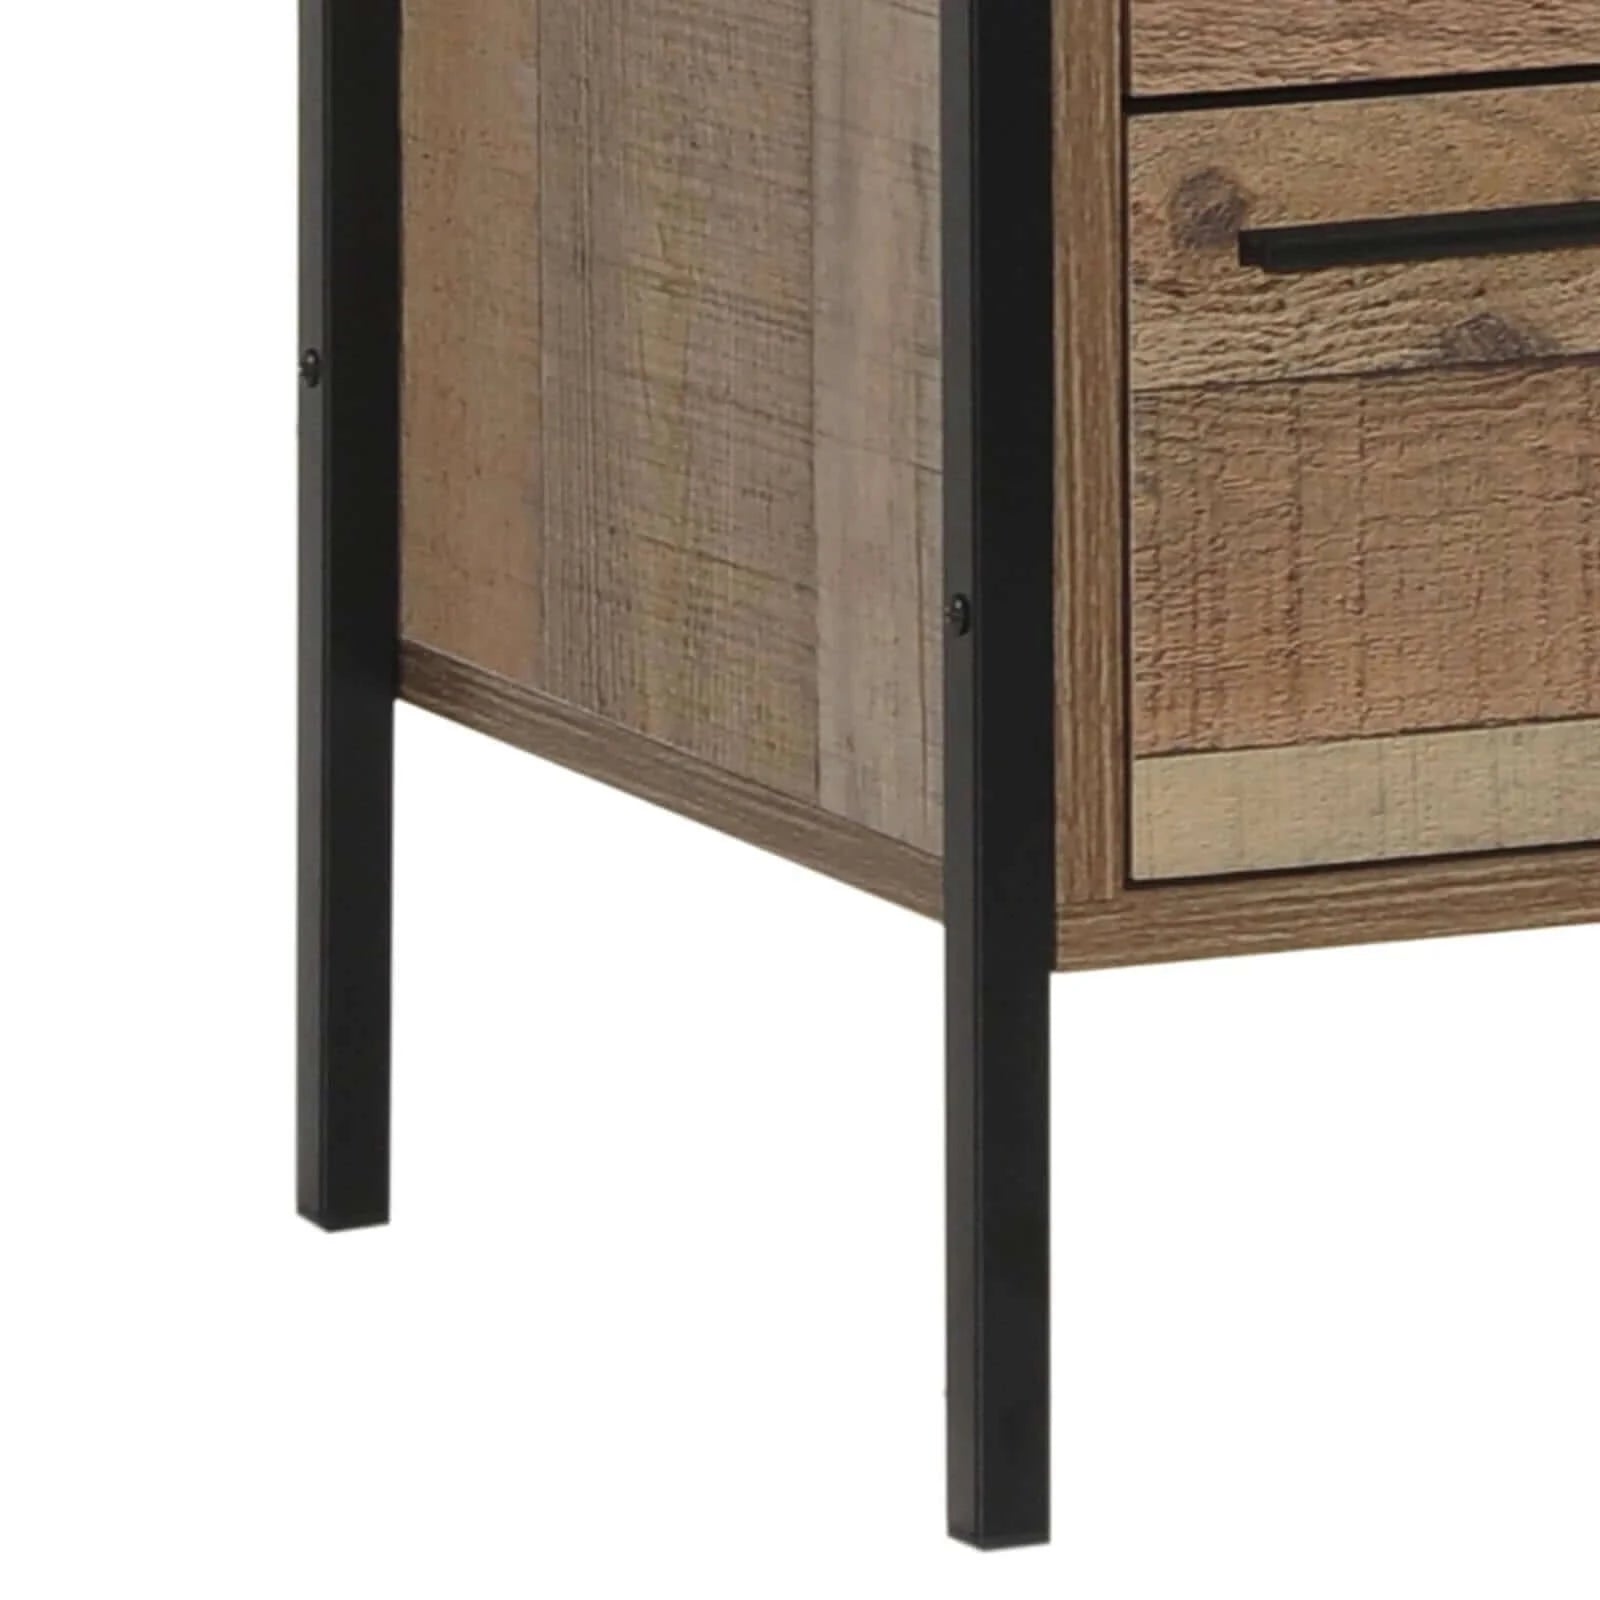 Buy bedside table 2 drawers night stand particle board construction in oak colour - upinteriors-Upinteriors